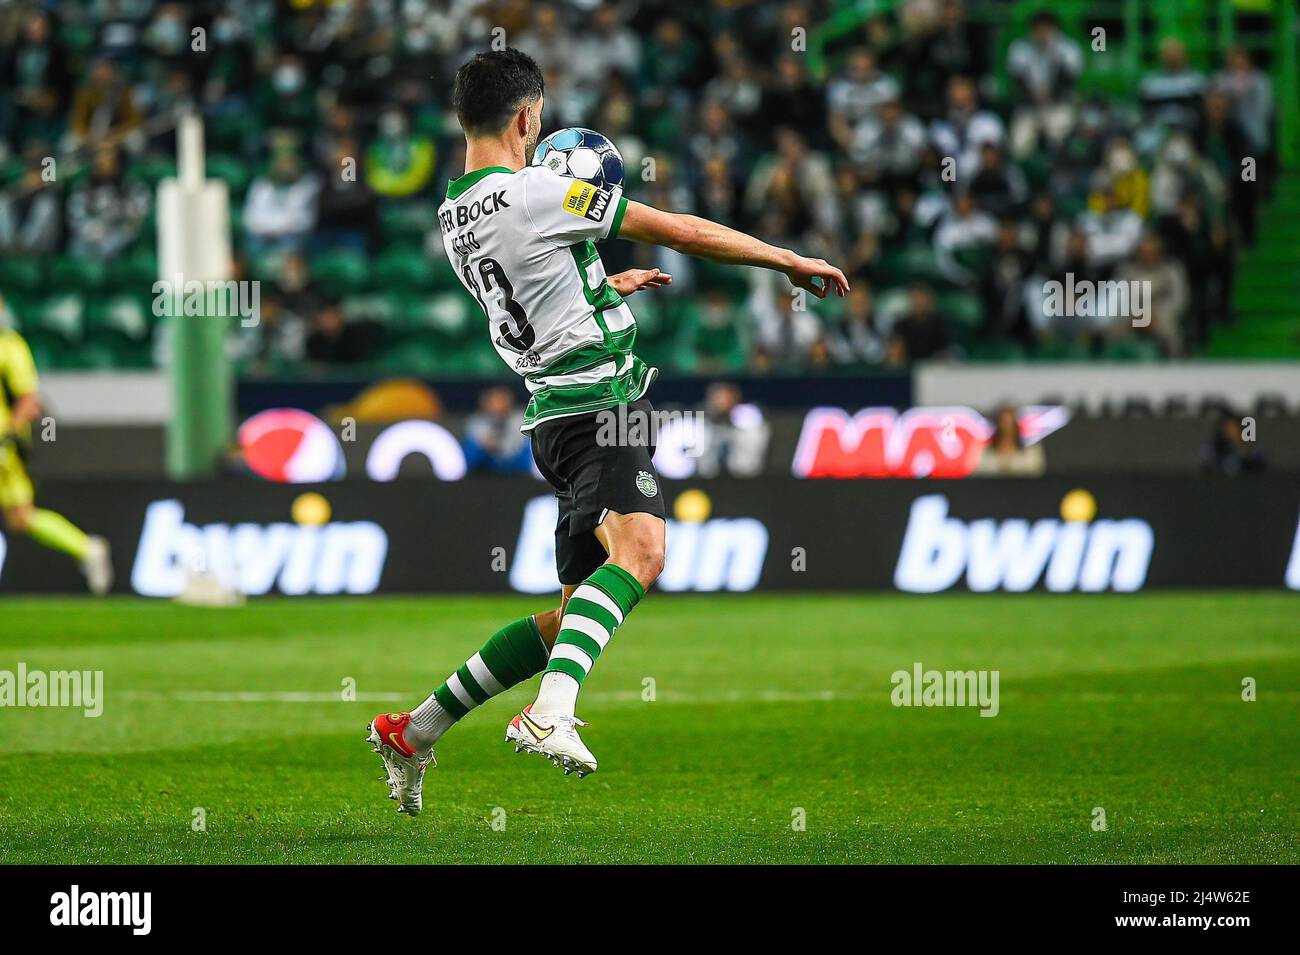 Lisbon, Portugal. 17th Apr, 2022. Luis Neto from Sporting seen in action during the Liga Bwin football match between Sporting and Benfica at Estadio Jose Alvalade. Final score: Sporting 0:2 Benfica. Credit: SOPA Images Limited/Alamy Live News Stock Photo